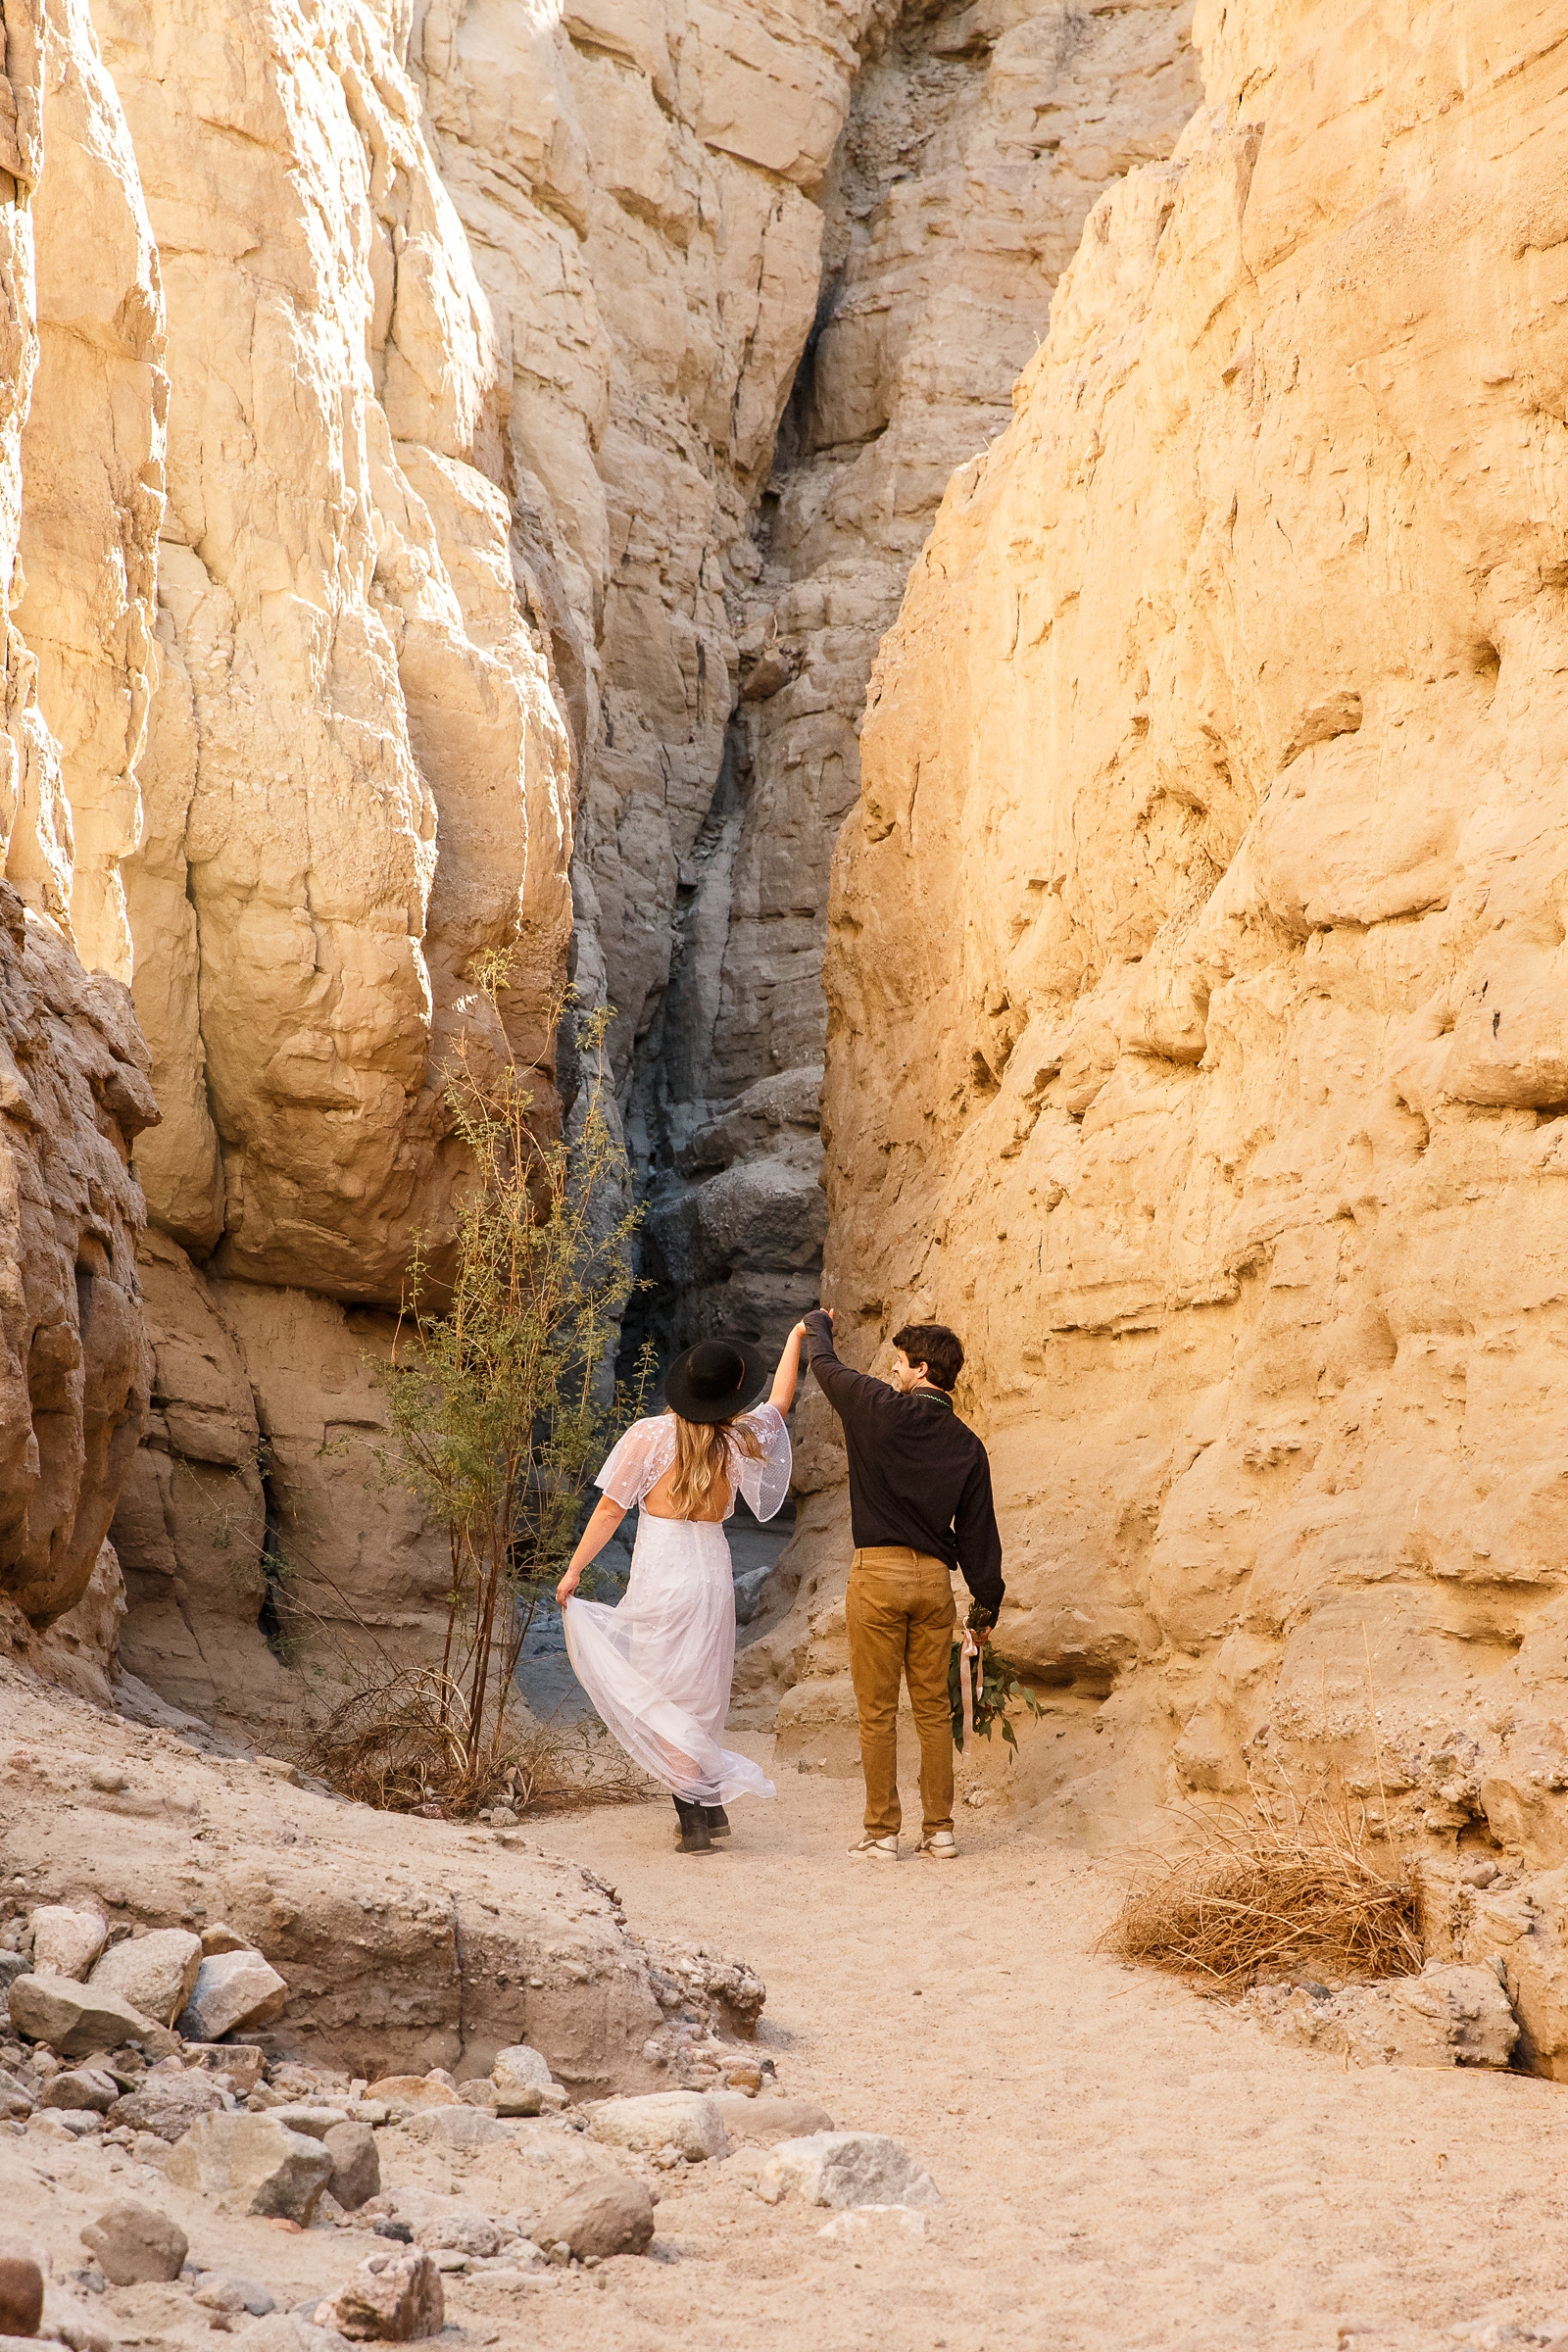 This couple dance at in a slot canyon during their scenic slot canyon Elopement session.